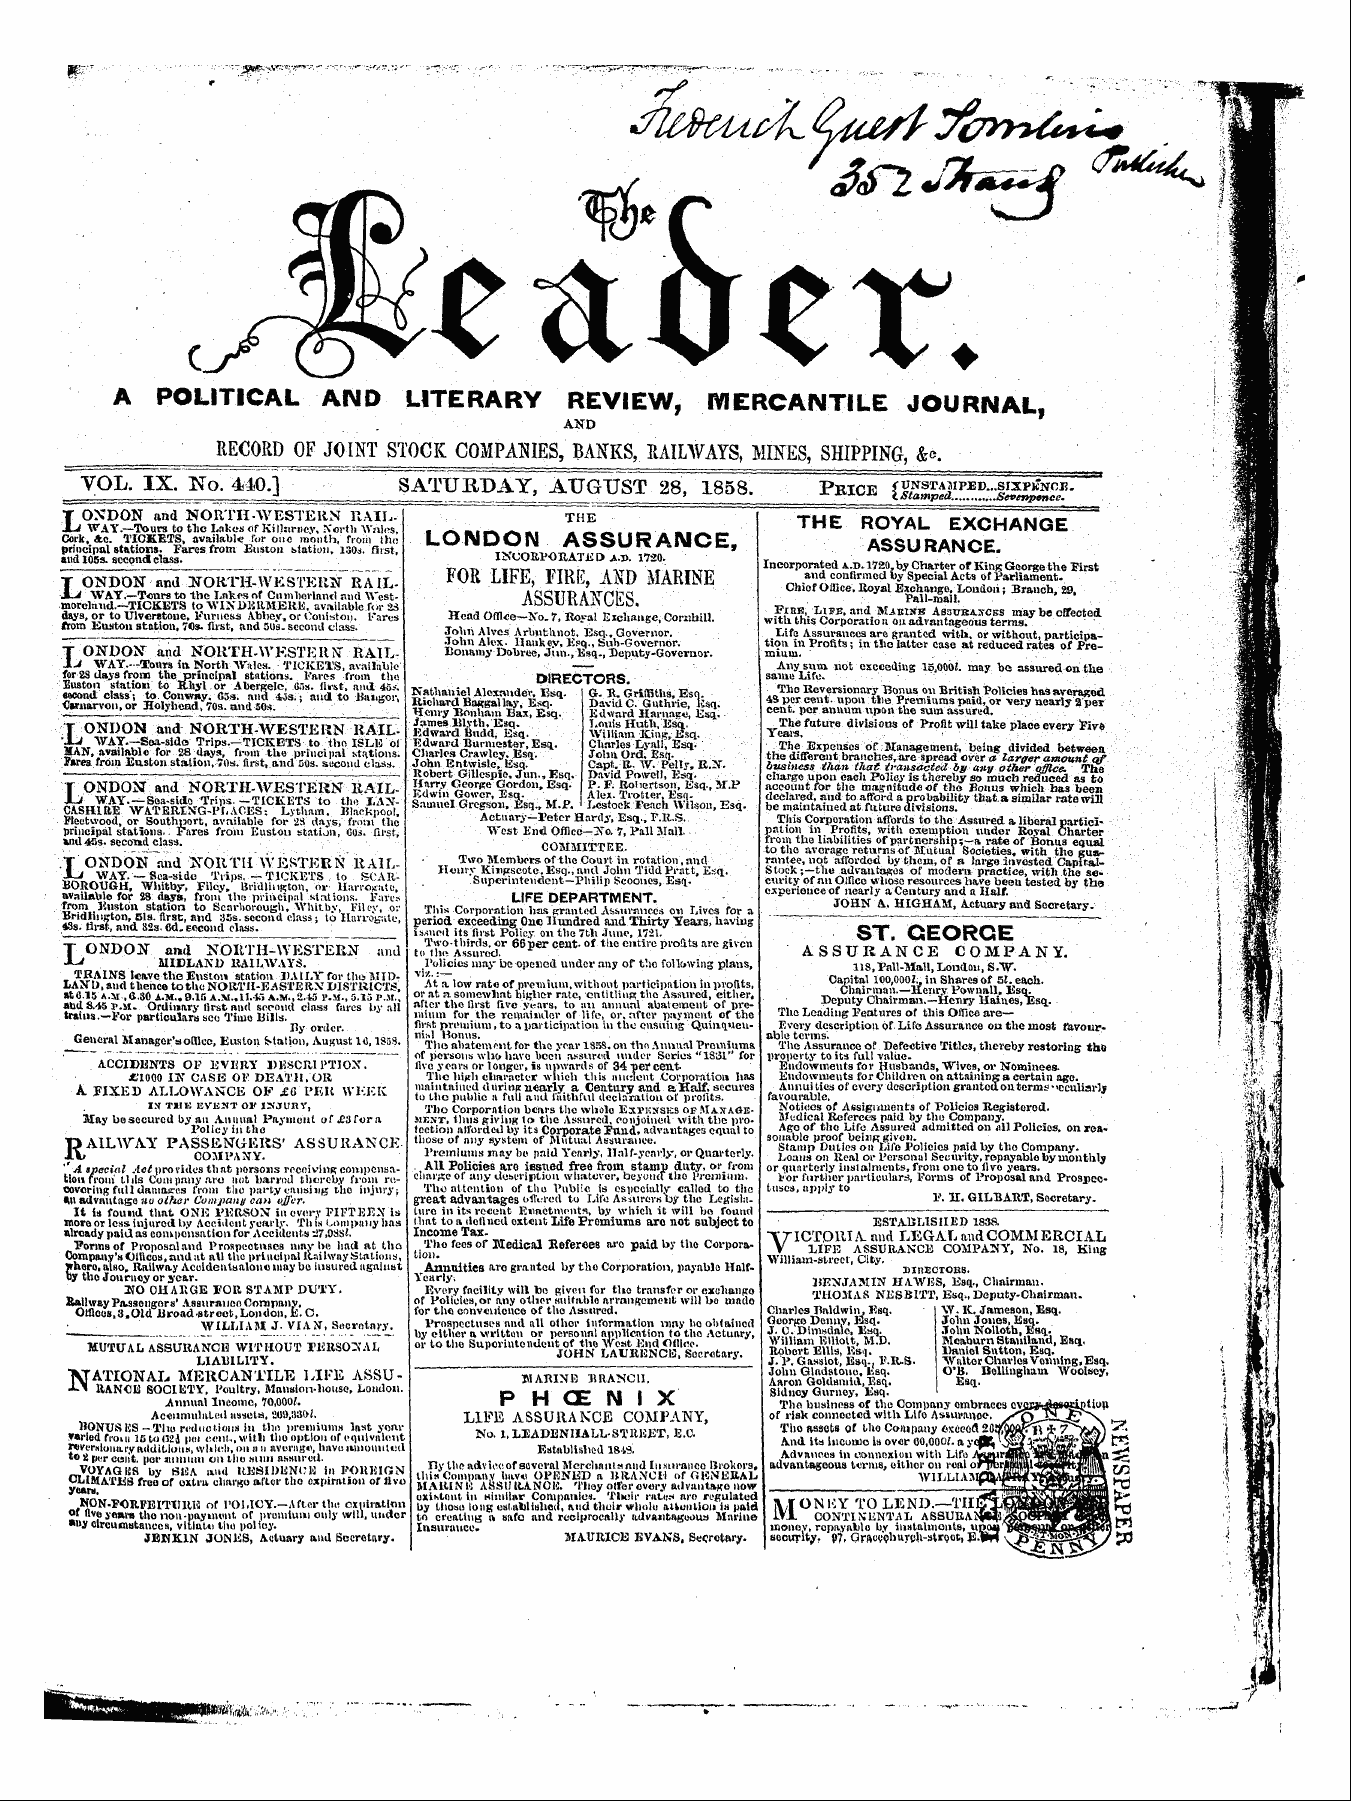 Leader (1850-1860): jS F Y, 1st edition - Ad00114